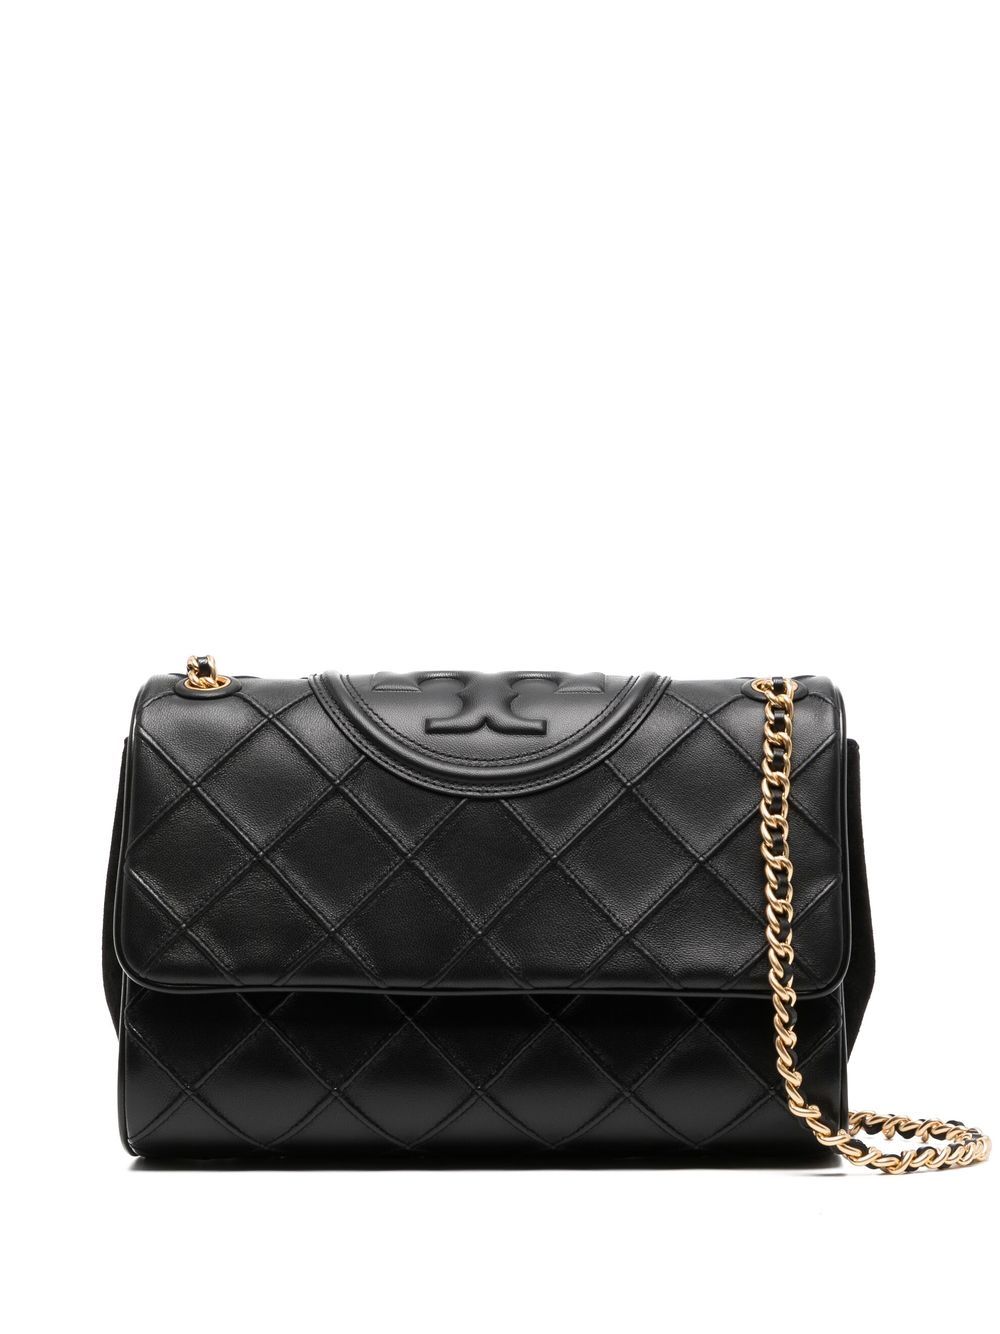 Tory Burch Fleming quilted leather shoulder bag - Black von Tory Burch